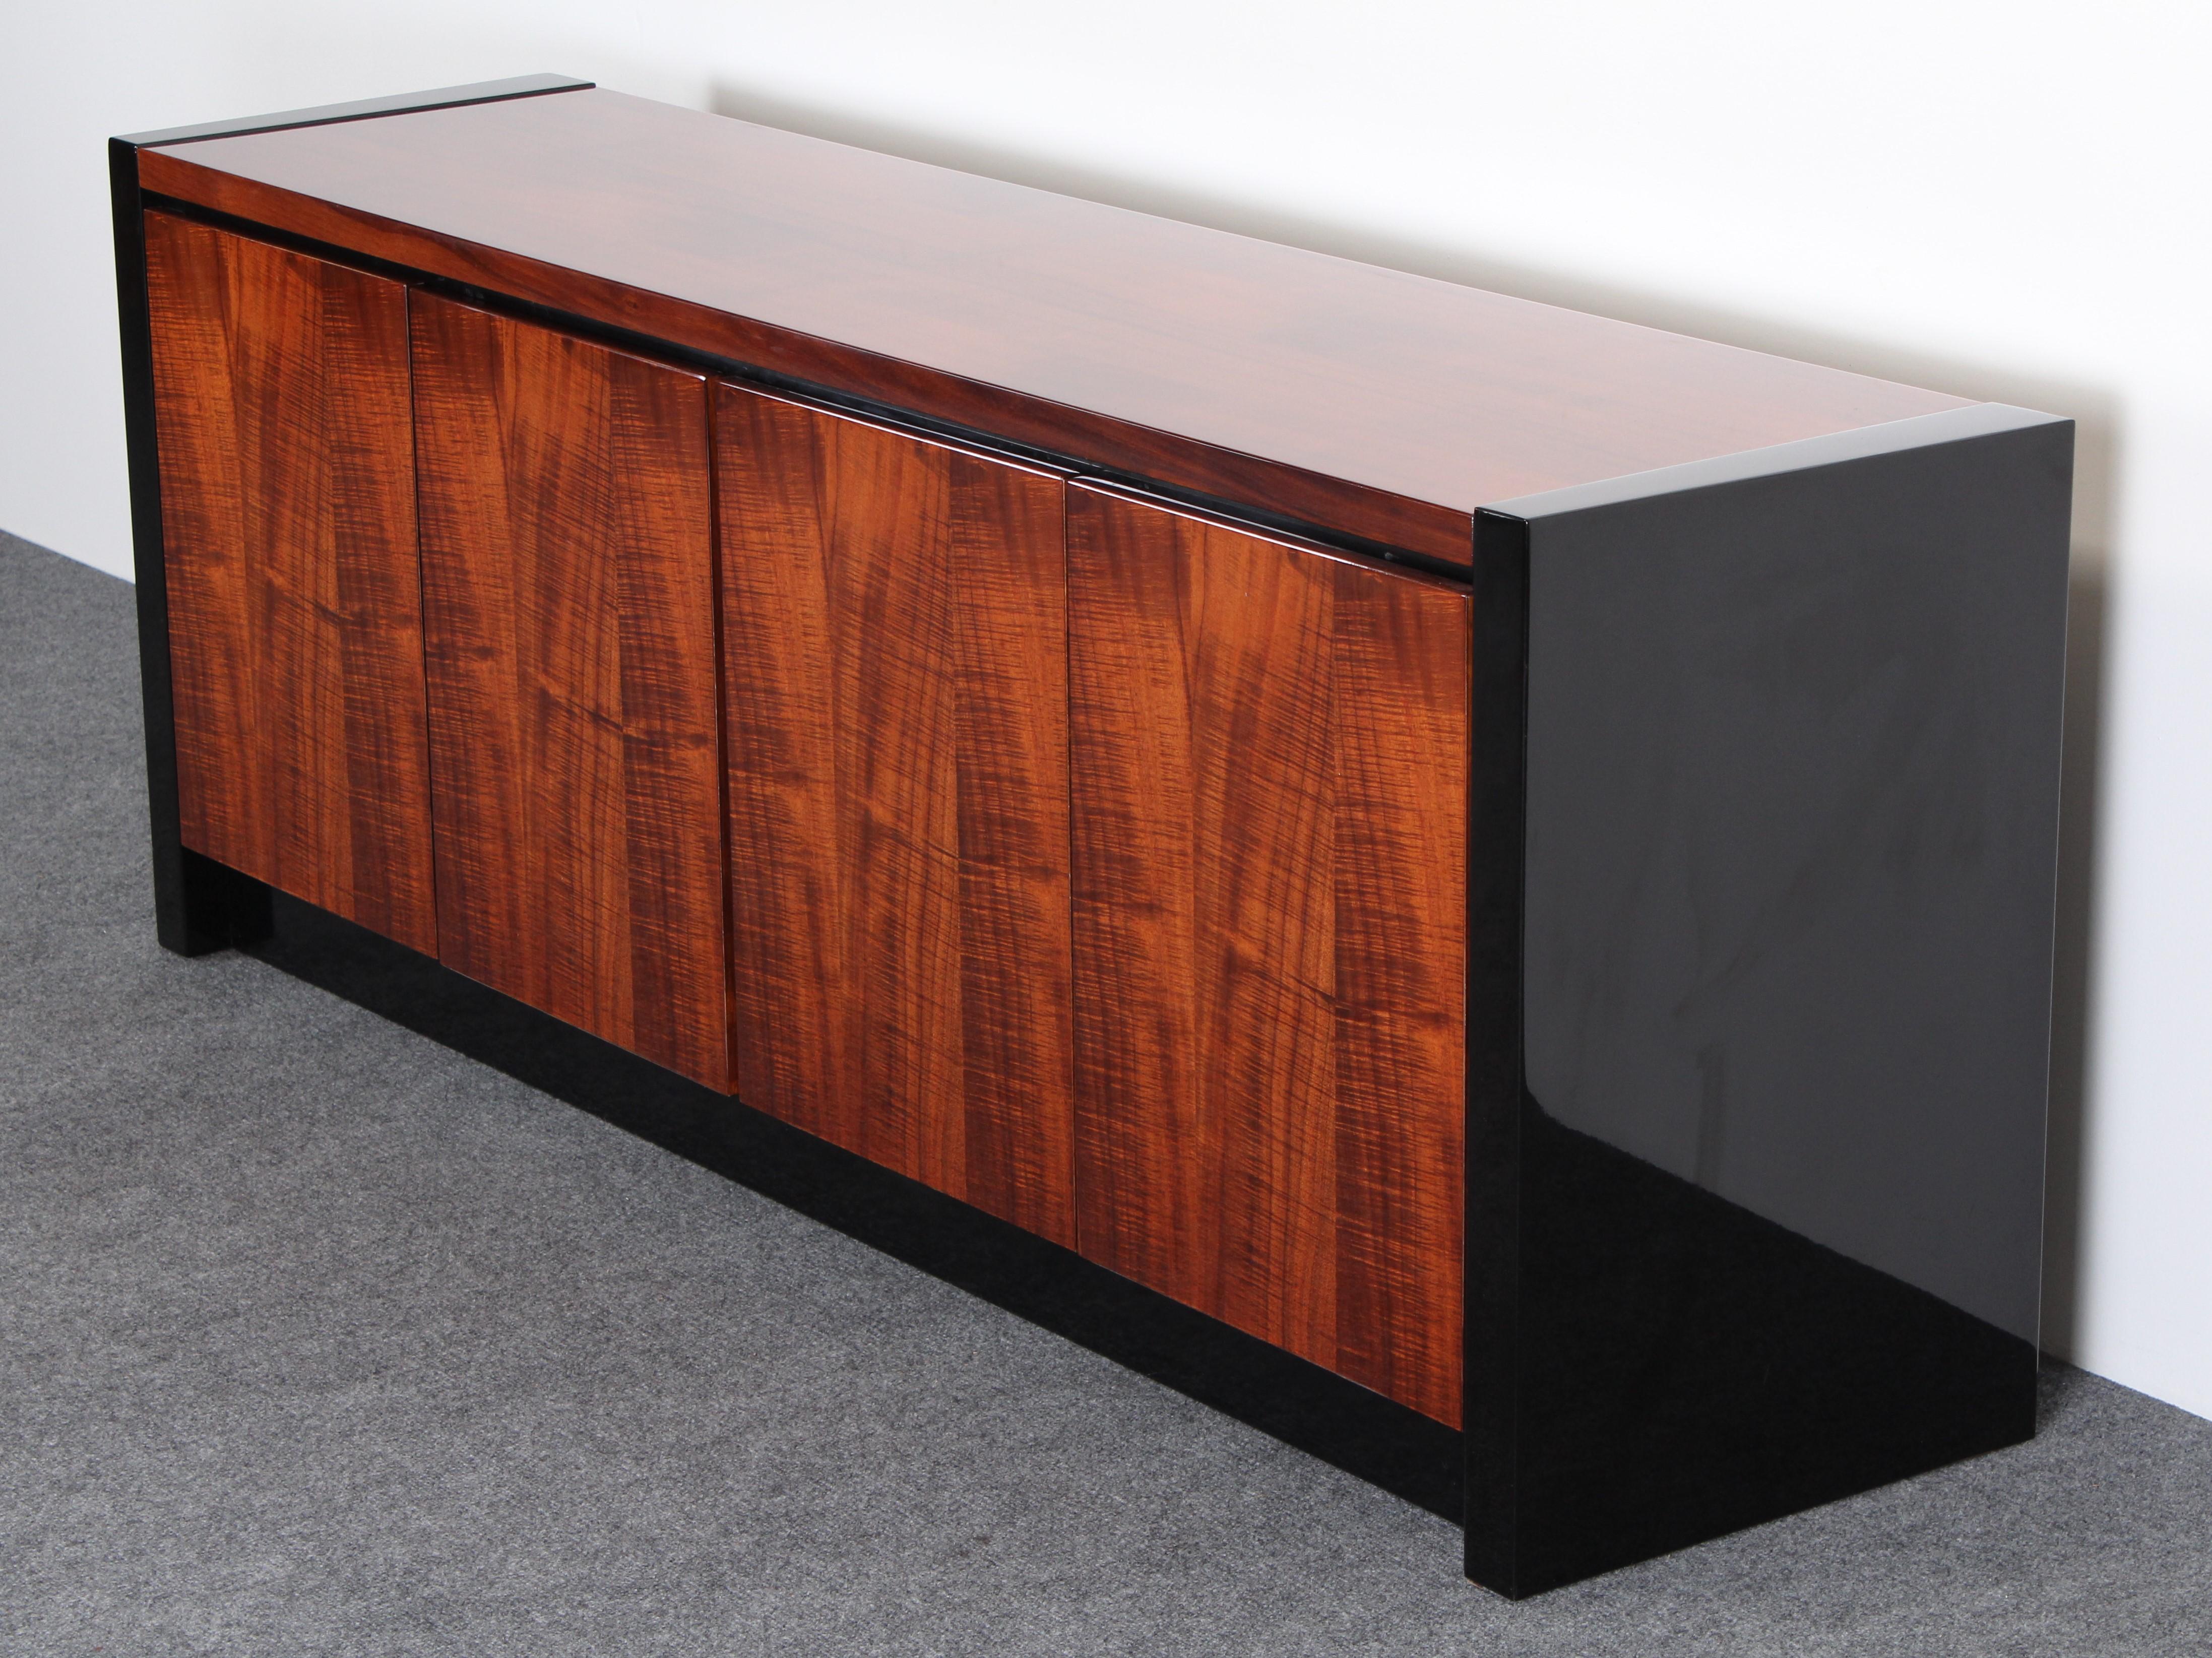 A stunning Henredon Koa wood and black lacquer credenza or sideboard from the Elan Collection by Henredon. Featuring Hawaiian koa wood with lacquer trim. There is a beautiful contrast between the grain of the koa wood and black lacquer finish.